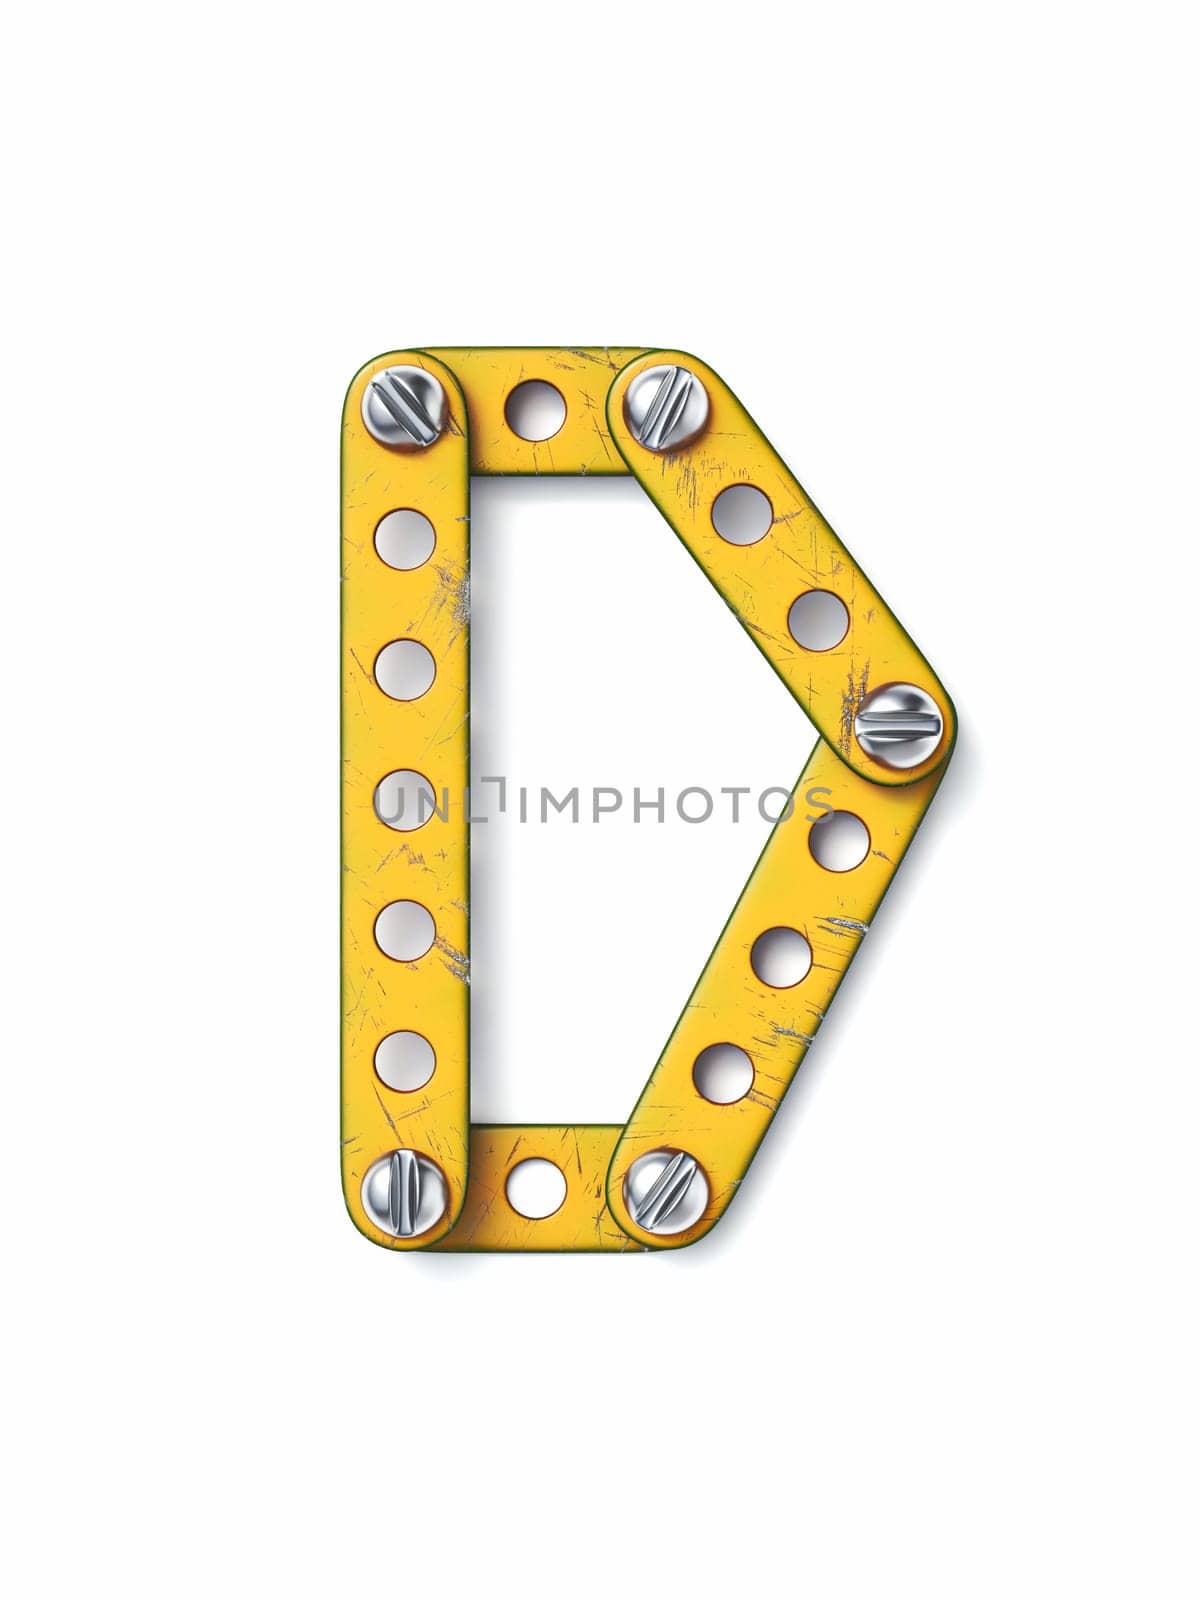 Aged yellow constructor font Letter D 3D rendering illustration isolated on white background